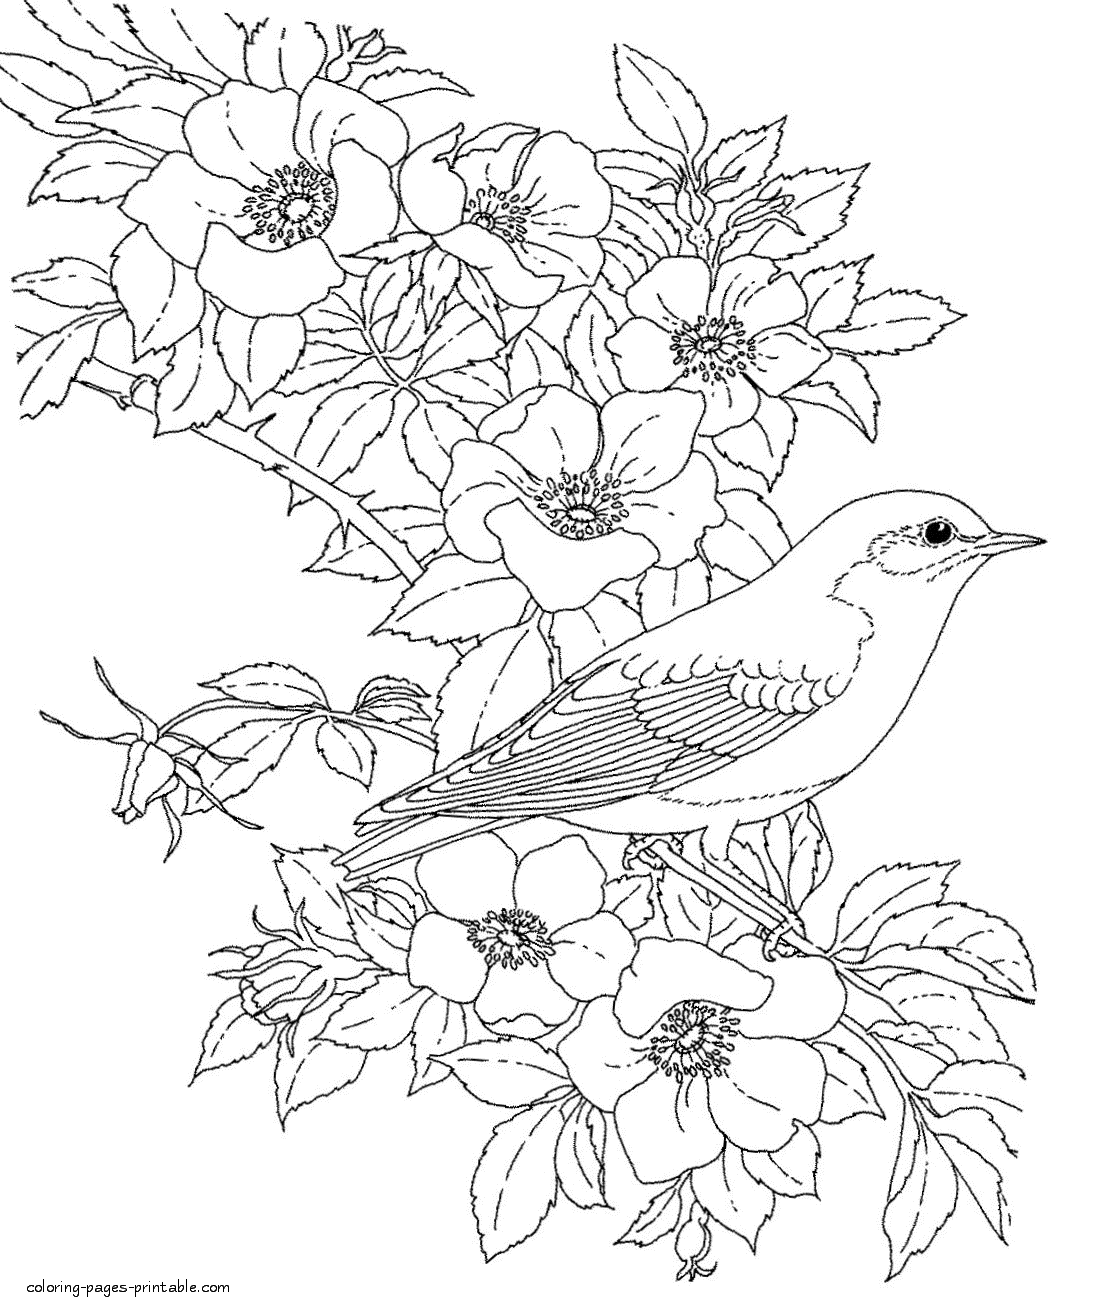 Coloring Pages For Adults Bird And Flowers COLORING PAGES PRINTABLE COM